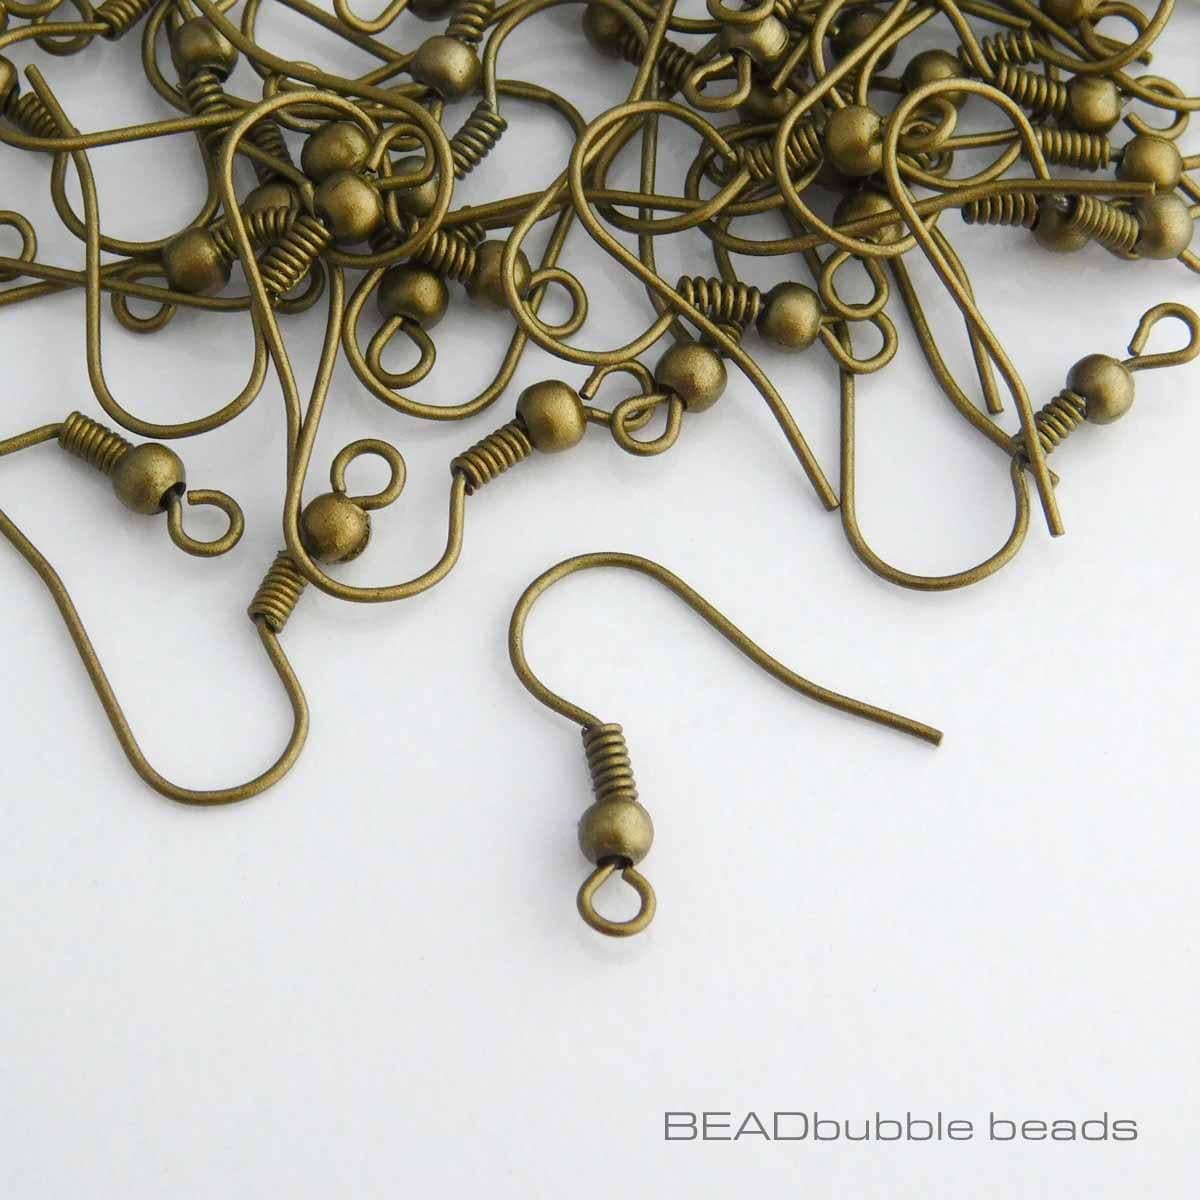 30pc Twisted Fish Hook Earring Findings for Earring Making, Earring Hooks, Earring  Findings, Earring Making, Earring Hardware, Fish Hooks 